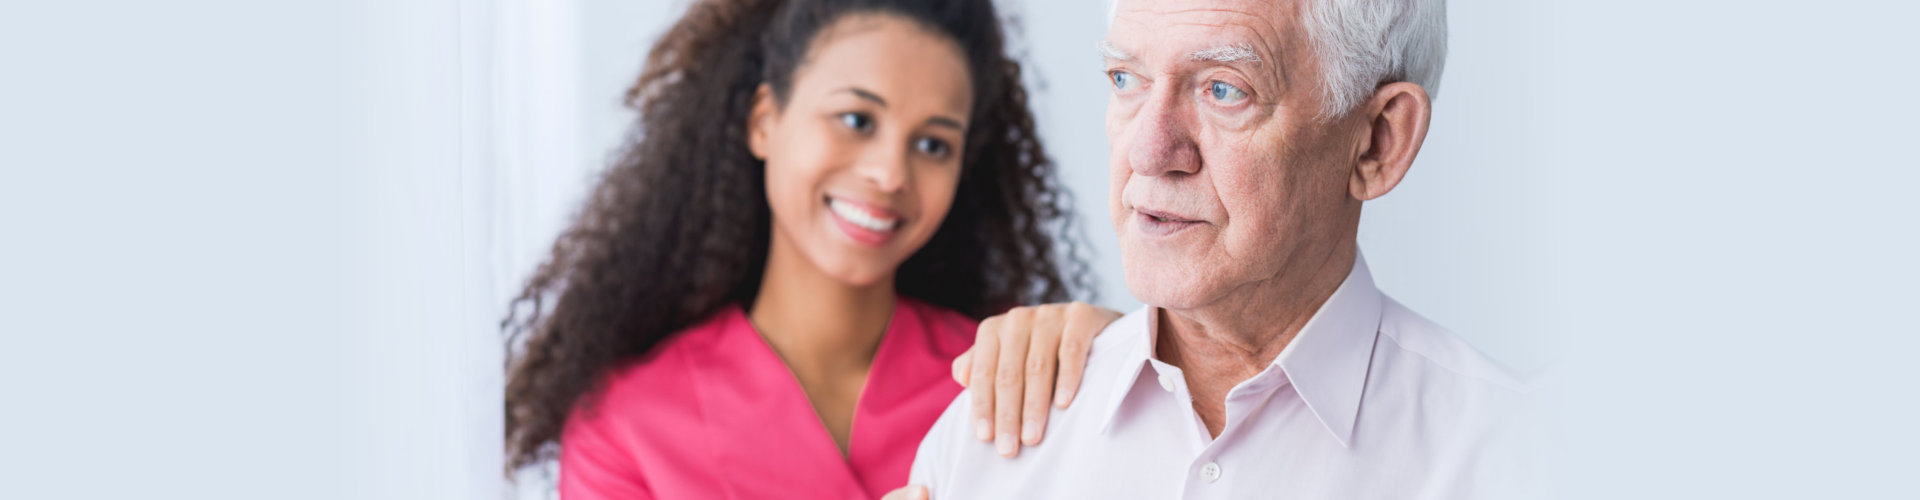 Female carer assisting and supporting senior man